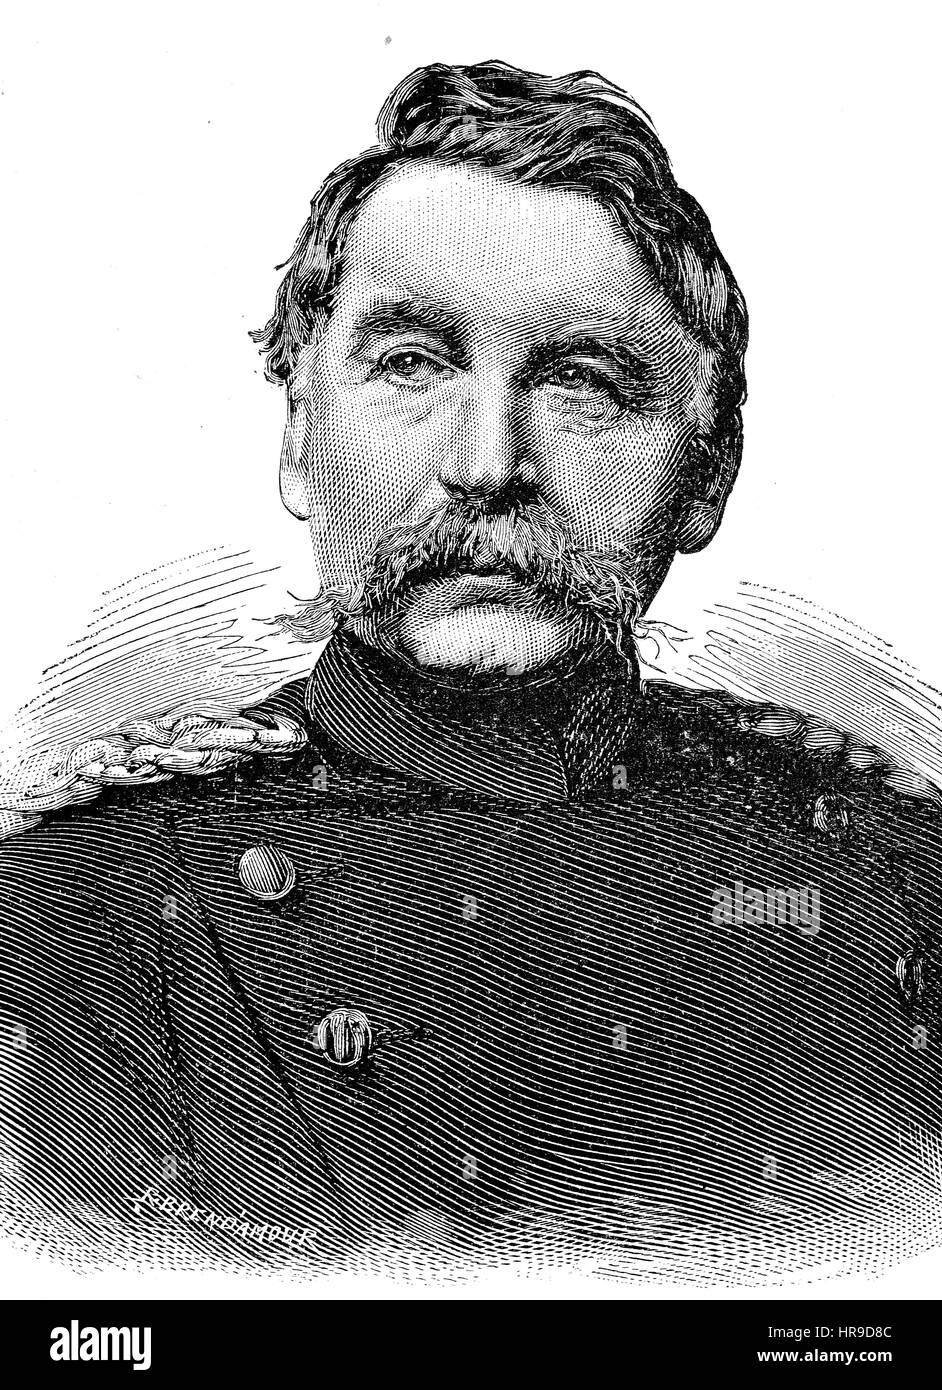 Gustav von Alvensleben, 1803 - 1881, was a Prussian General der Infanterie, Situation from the time of The Franco-Prussian War or Franco-German War,  Deutsch-Franzoesischer Krieg, 1870-1871, Reproduction of an original woodcut from the year 1885, digital improved Stock Photo